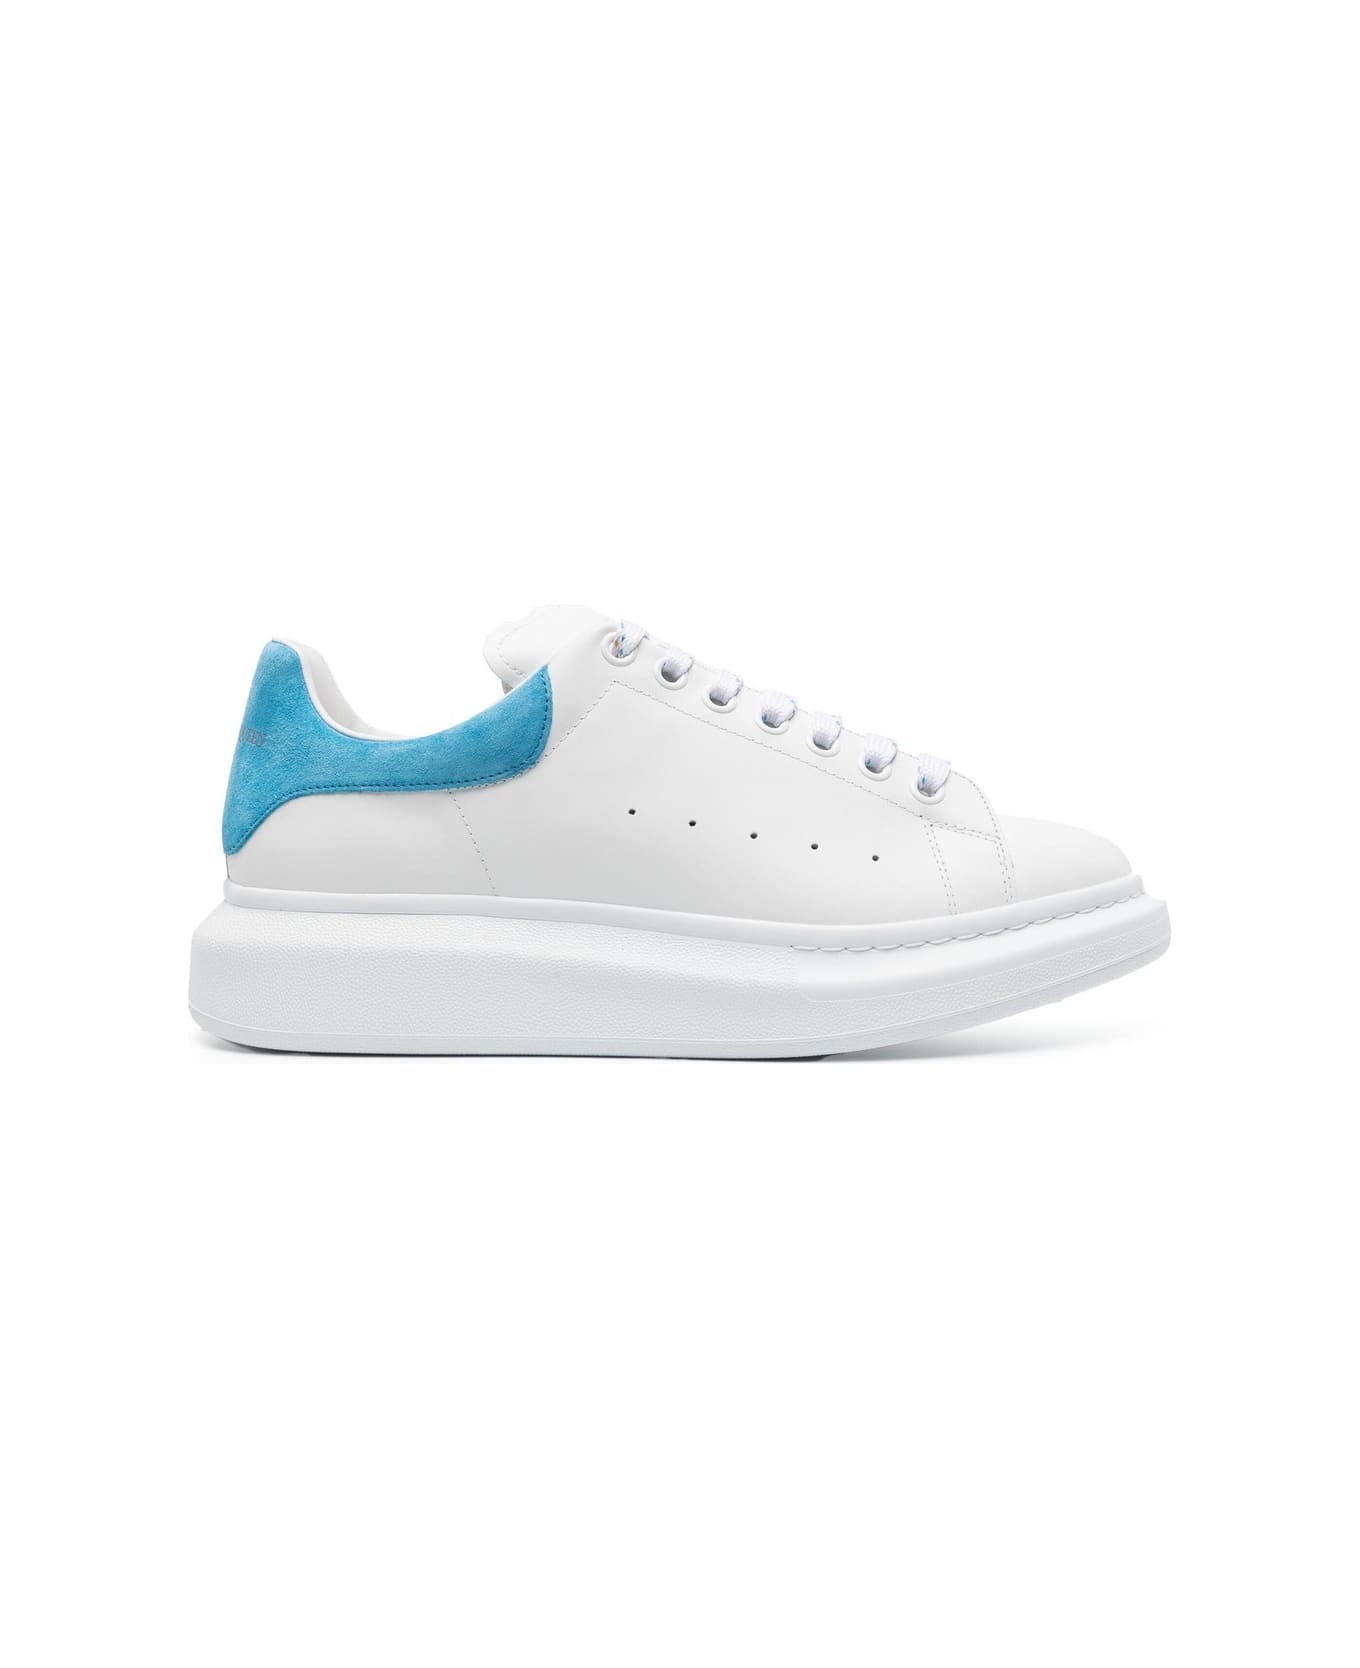 Alexander McQueen White Oversized Sneakers With Light Blue Suede Spoiler - White